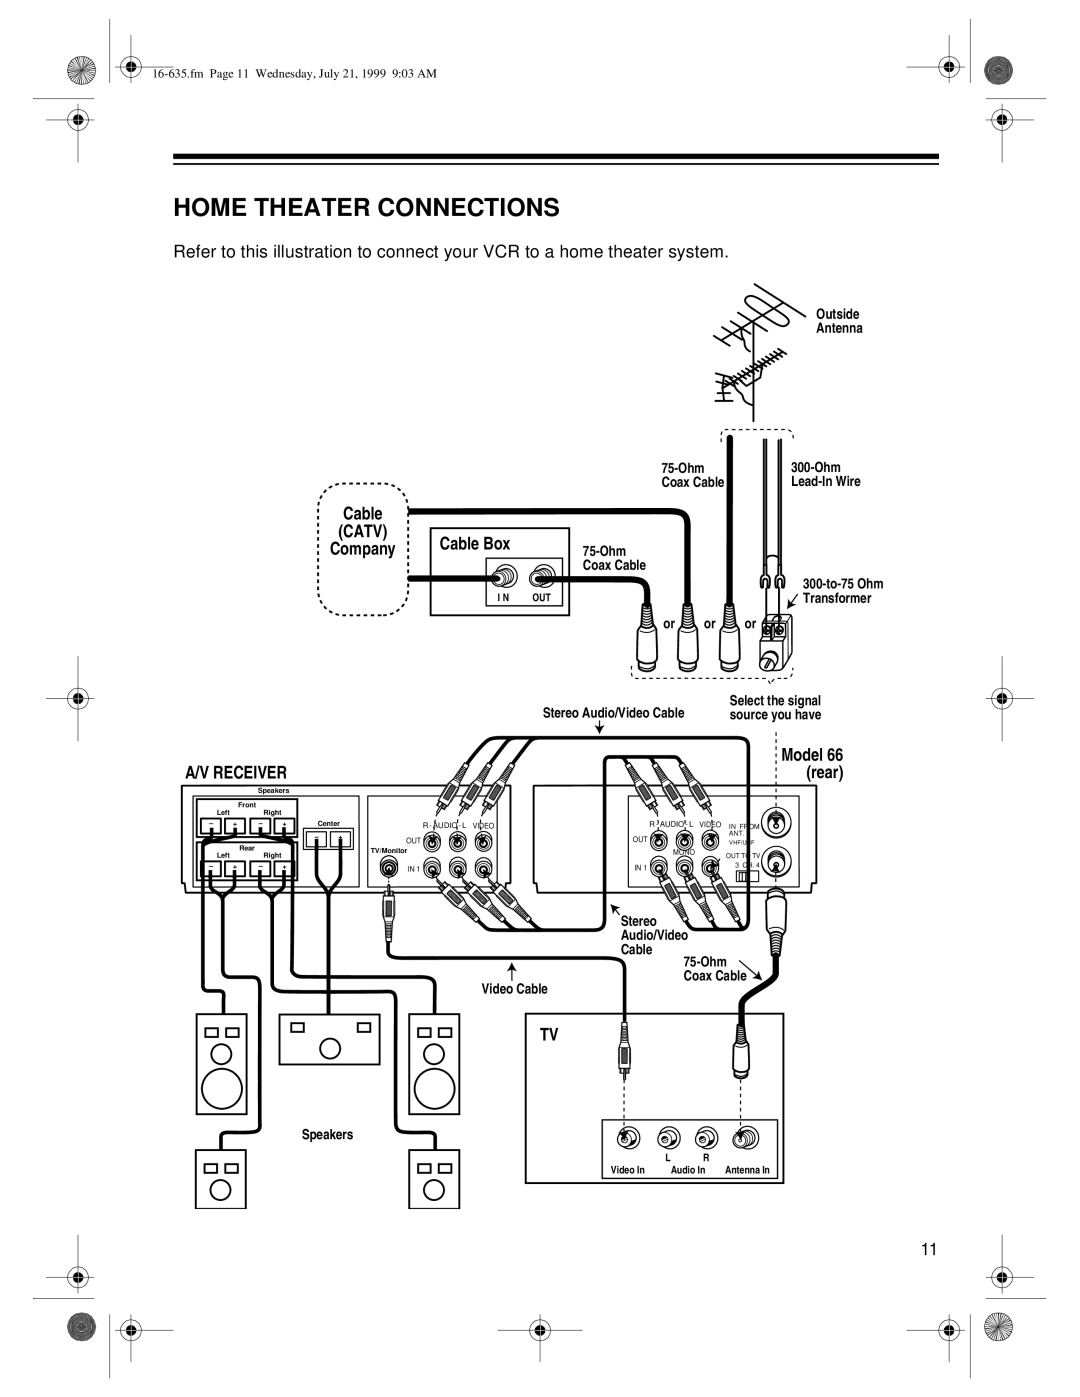 Radio Shack Home Theater Connections, Model 66 rear, or or, Outside Antenna, 300-to-75 Ohm Transformer or, Speakers 